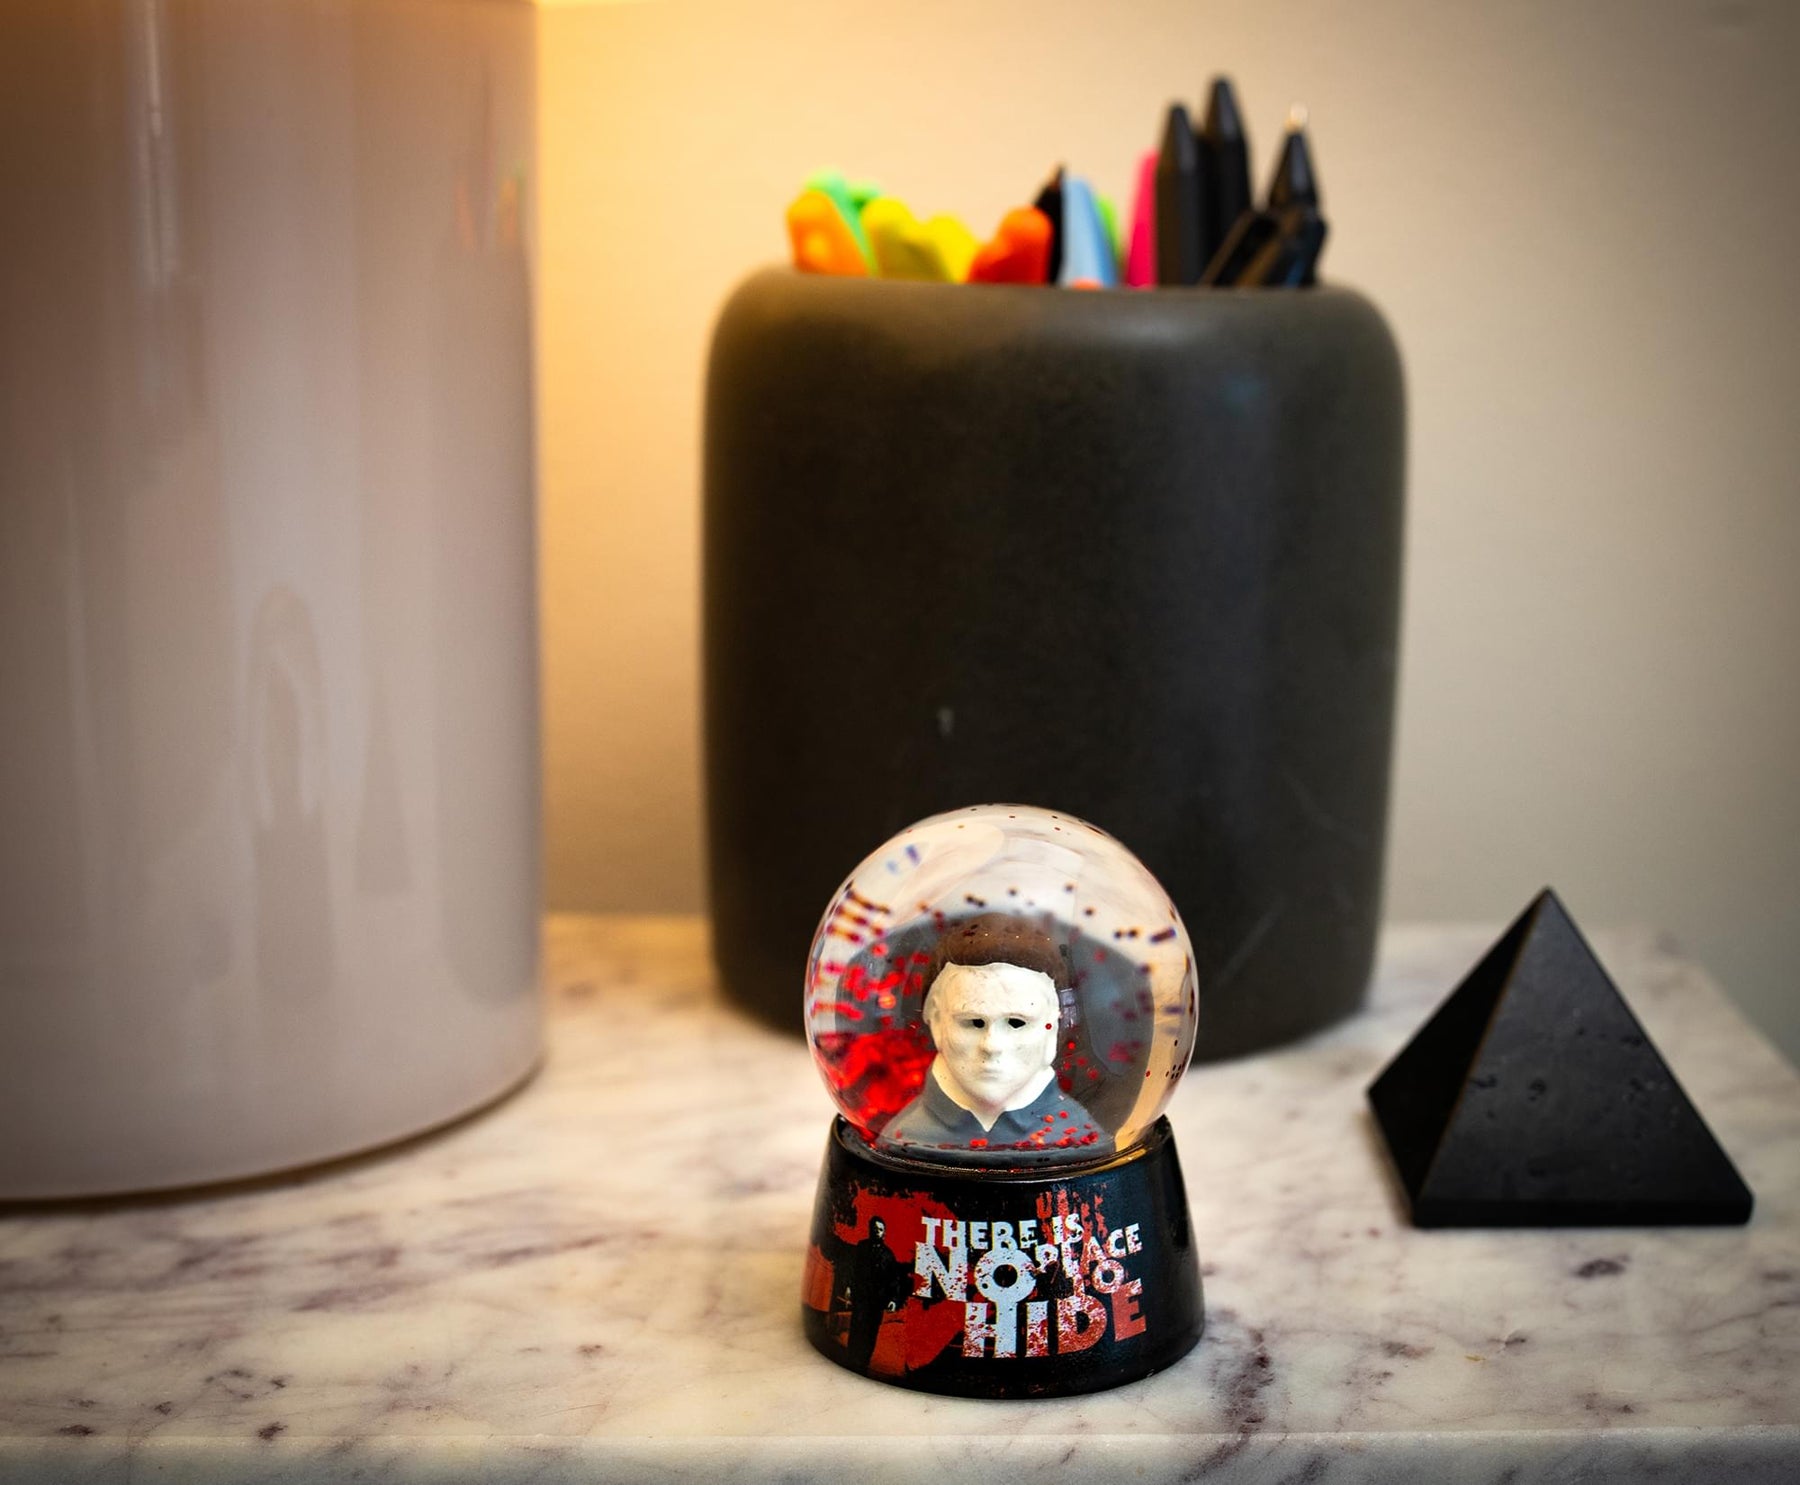 Halloween Michael Myers "No Place To Hide" Mini Snow Globe | 3 Inches Tall